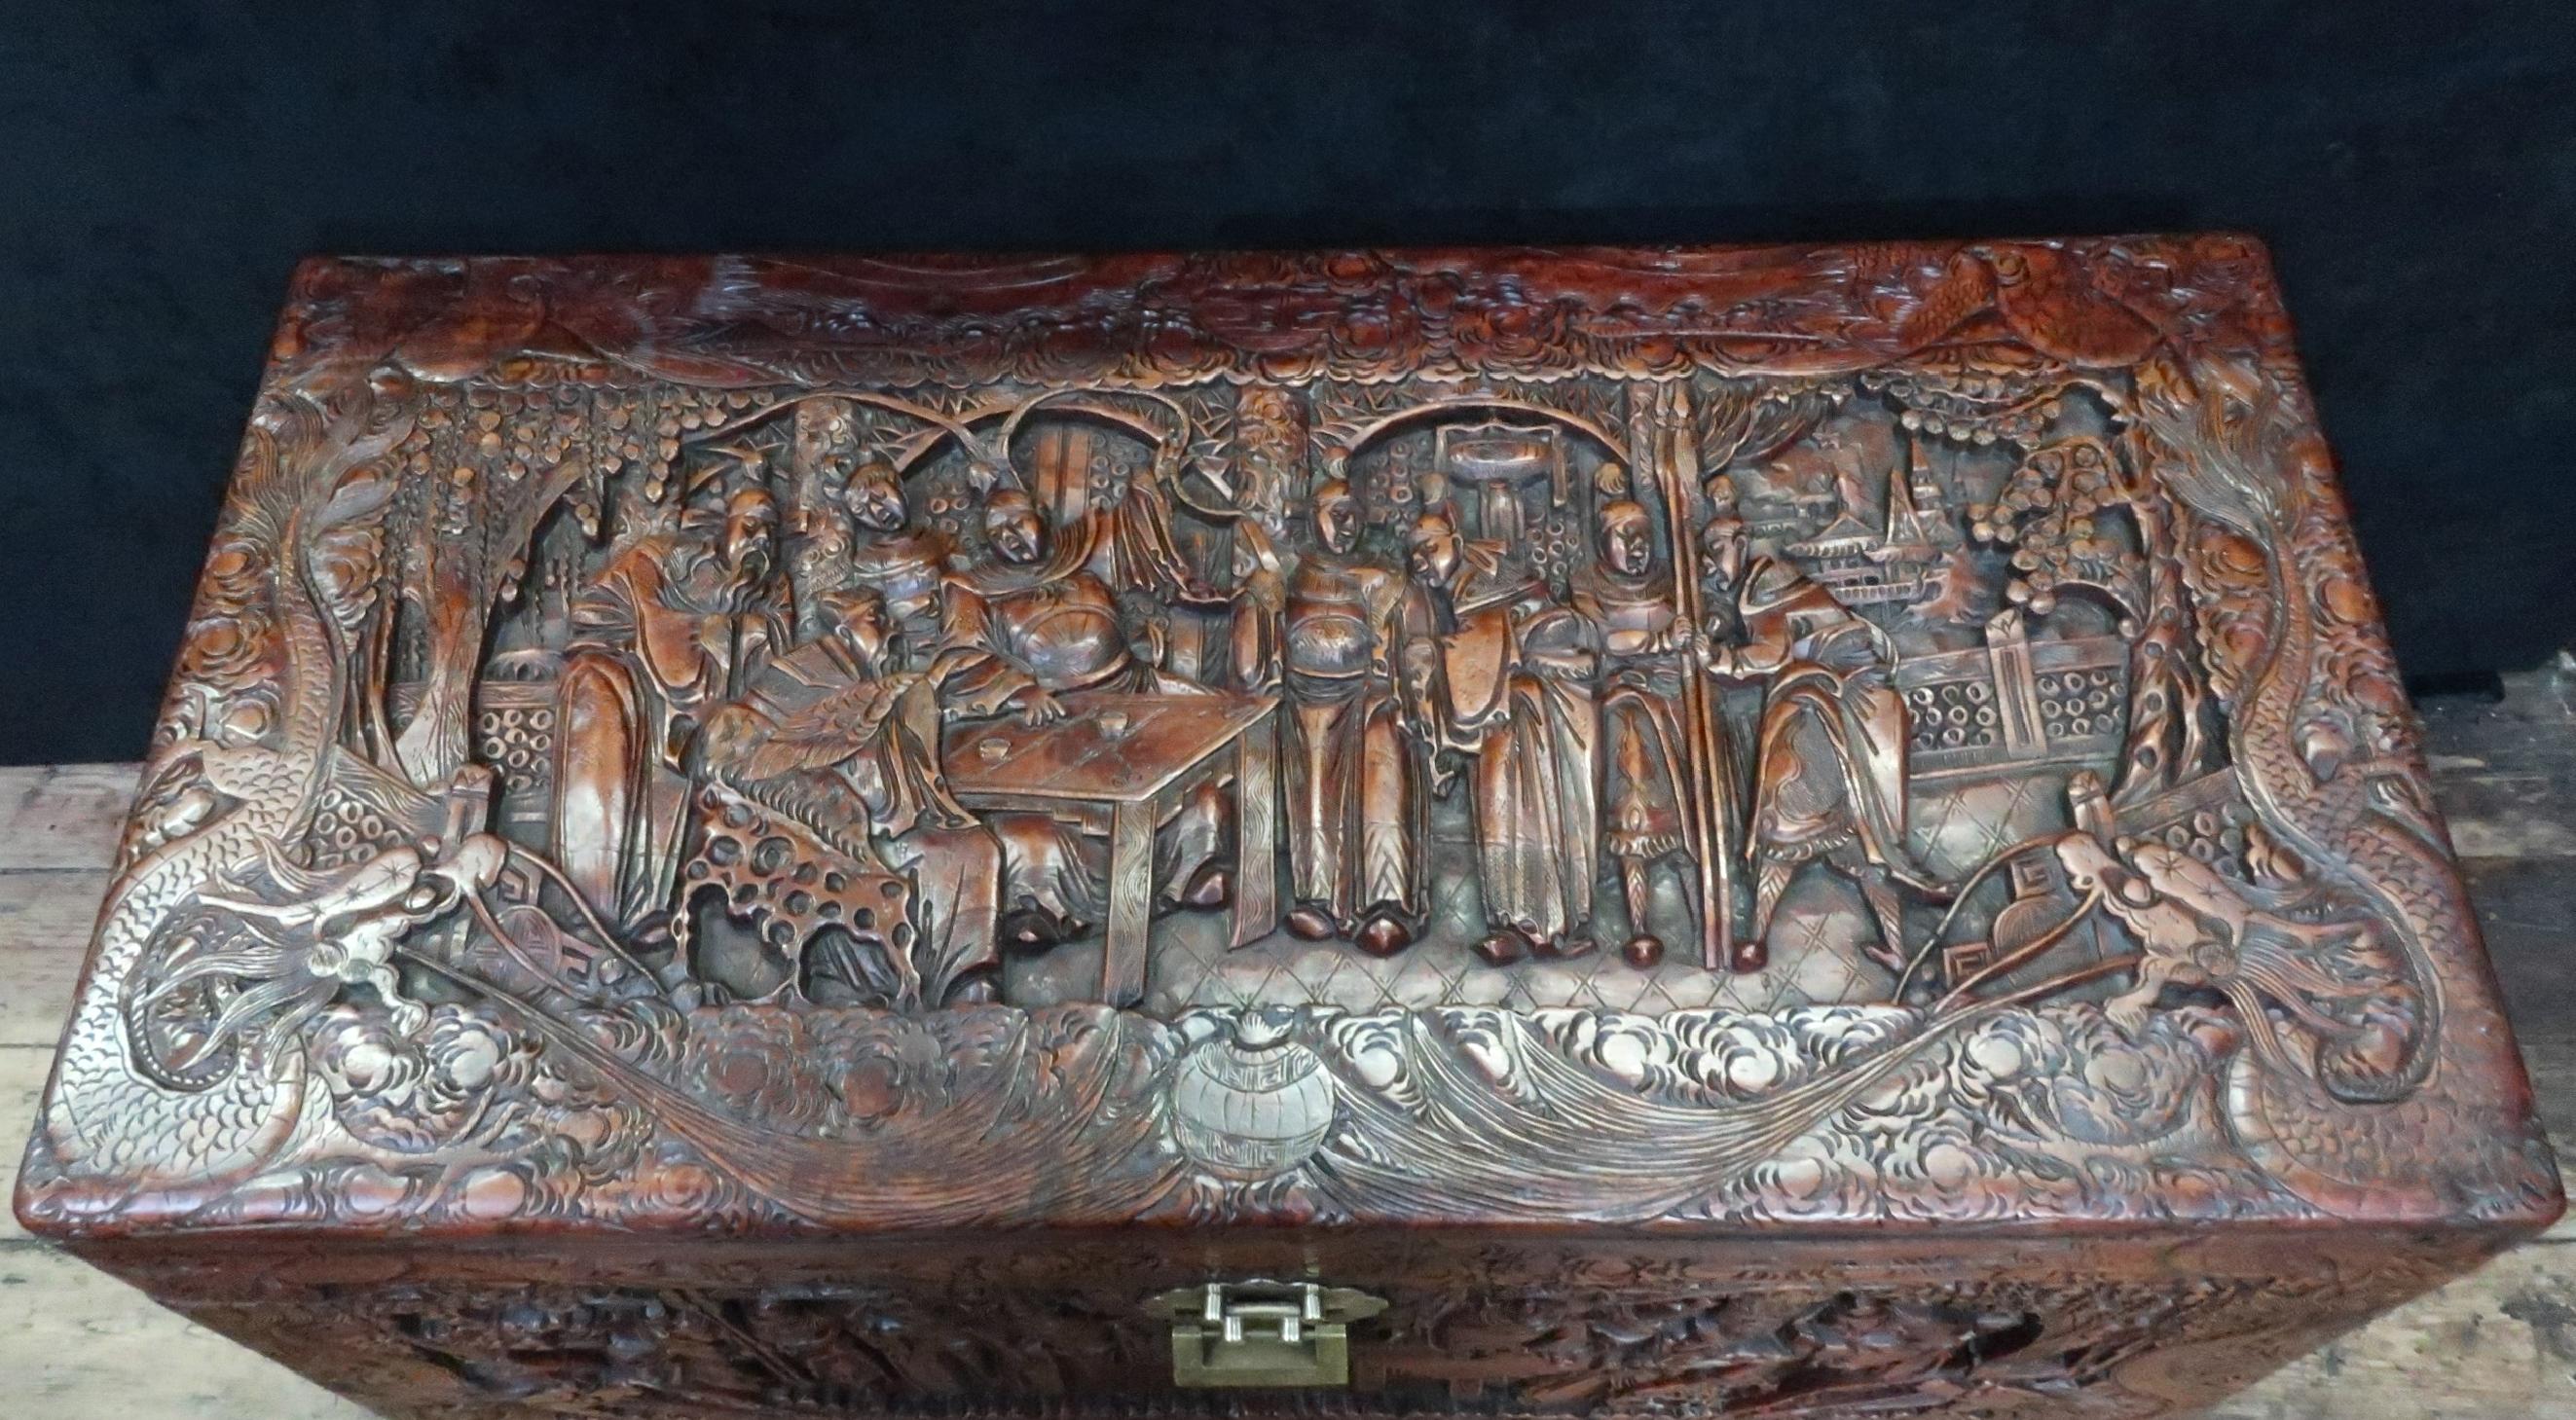 An extremely good quality early 20th century oriental freestanding camphor wood chest profusely and deeply carved with scenes of the eight immortals, dragons, birds, pagodas and trees. The sides and back are carved with mountain scenes within a